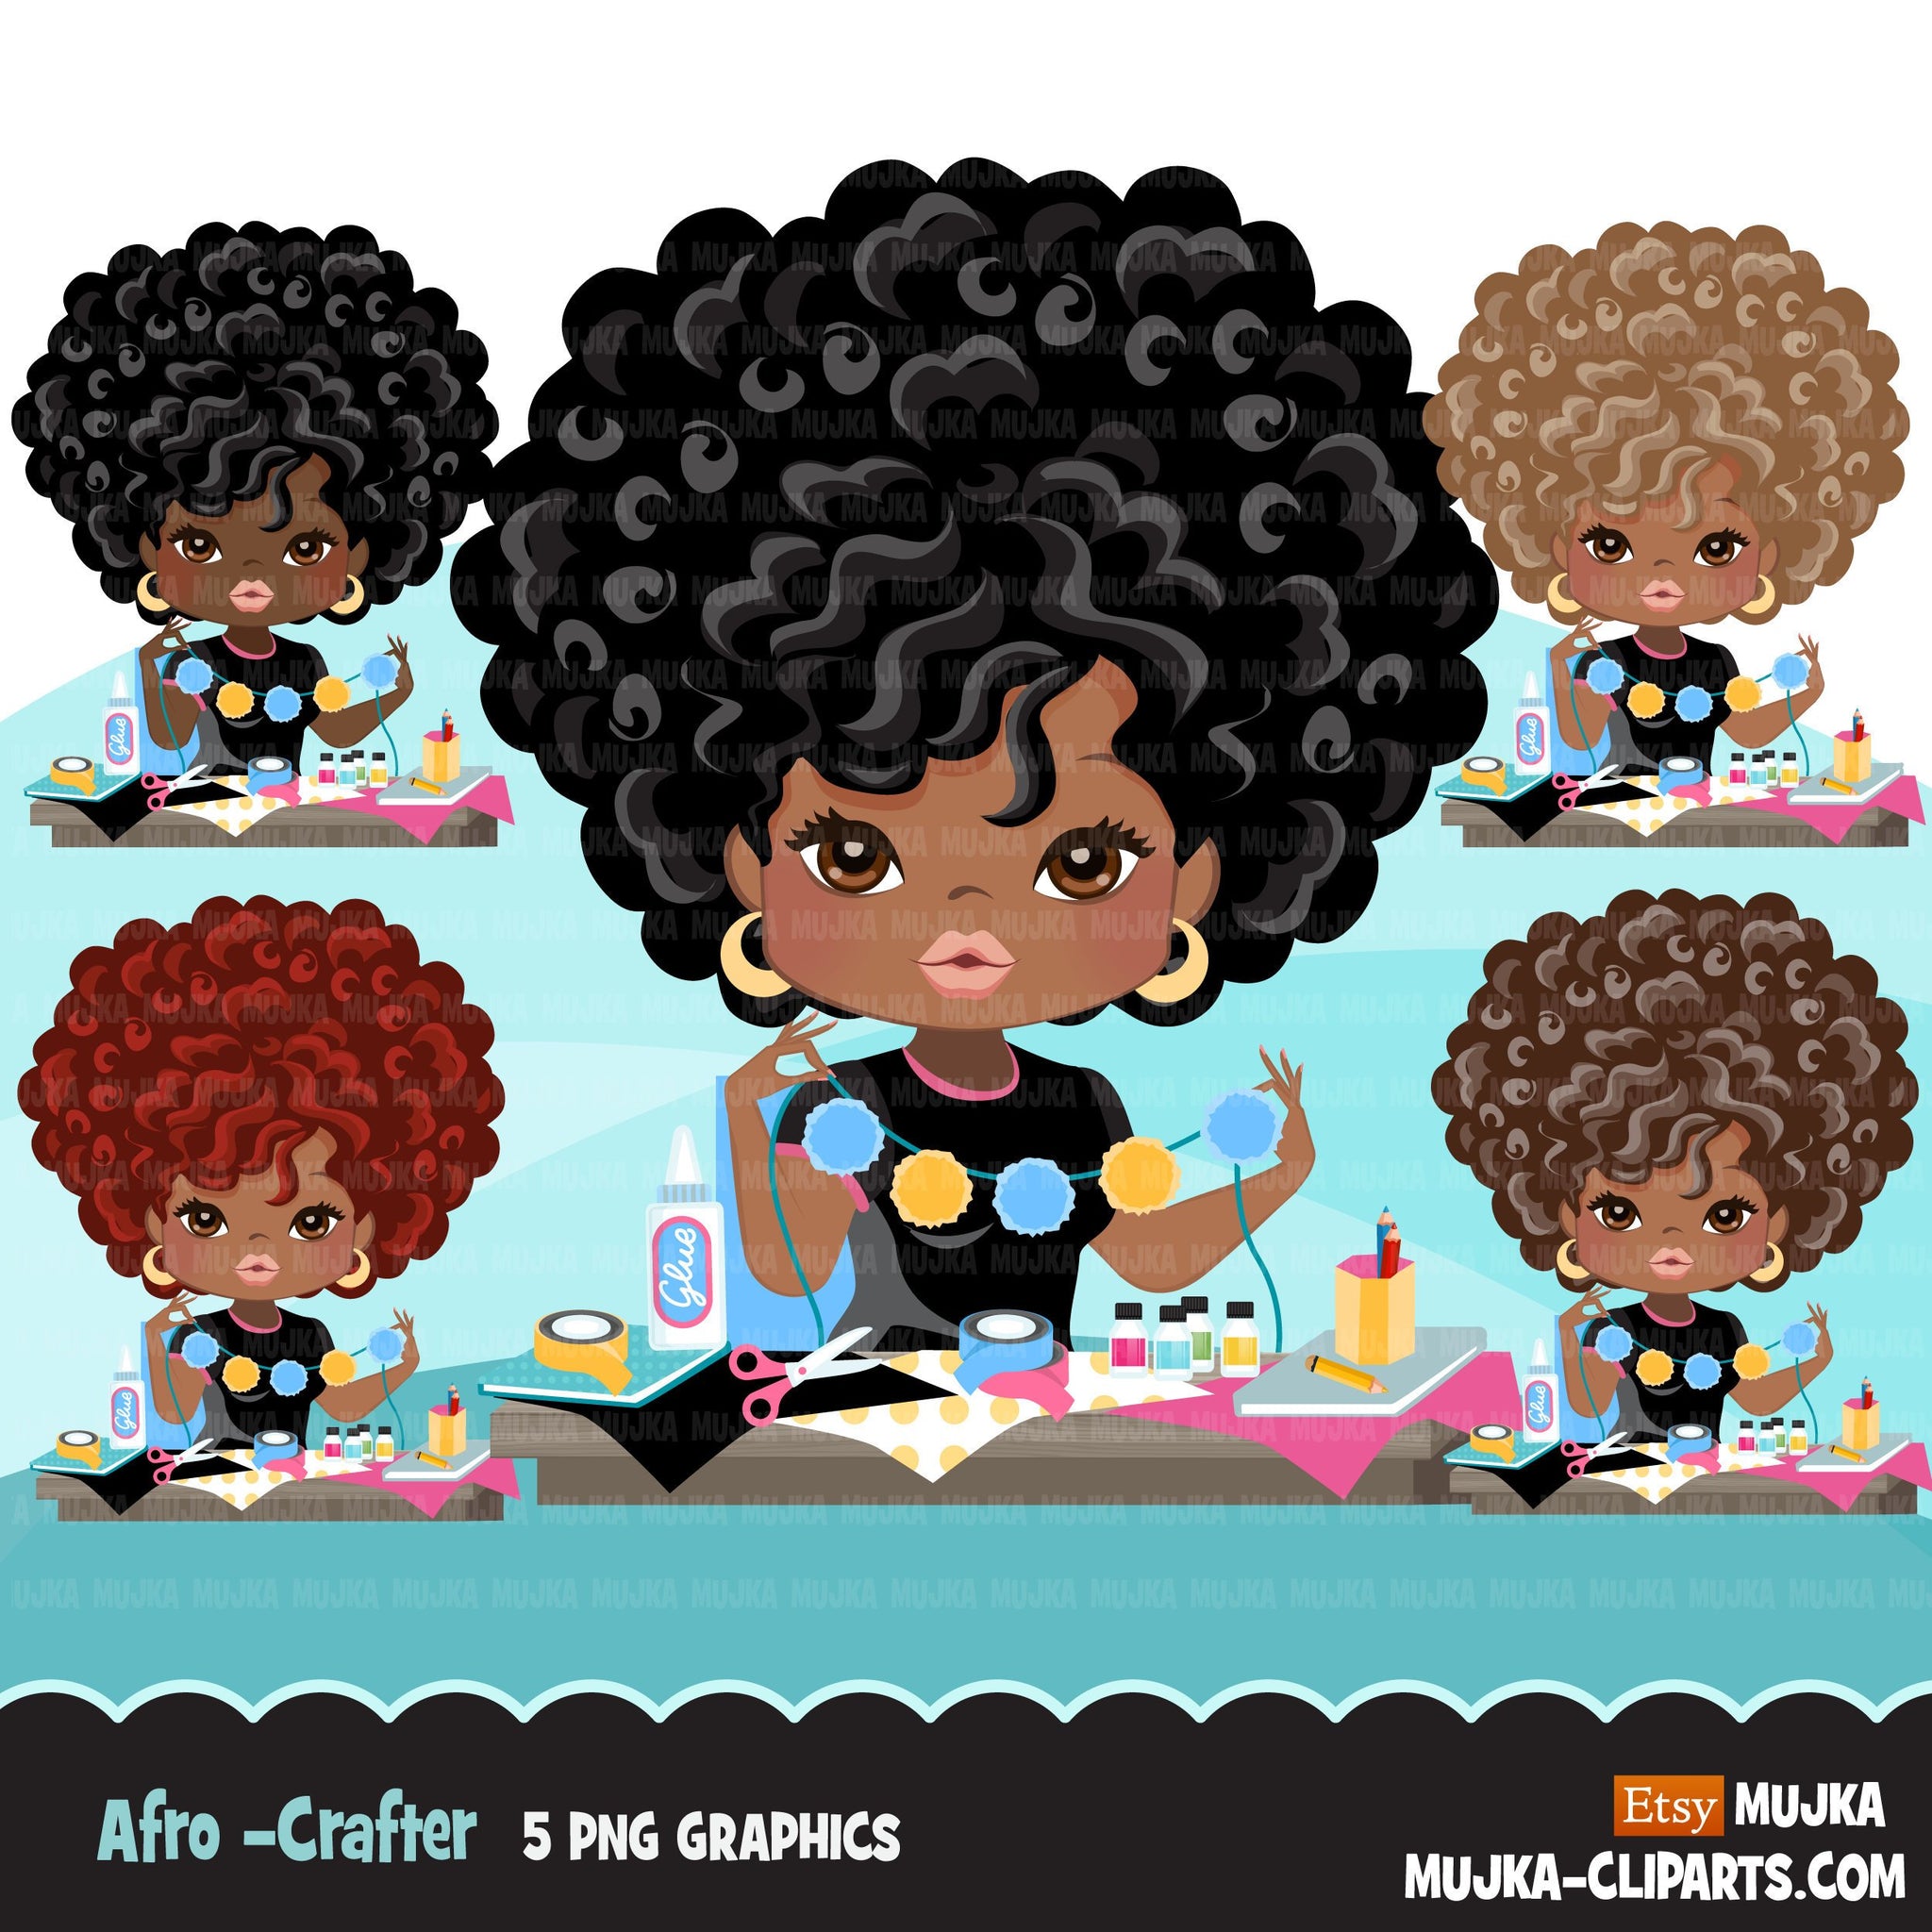 Afro black woman crafter avatar clipart with scrapbooking graphics African-American girl, print and cut T-Shirt Designs, Black Girls clip art